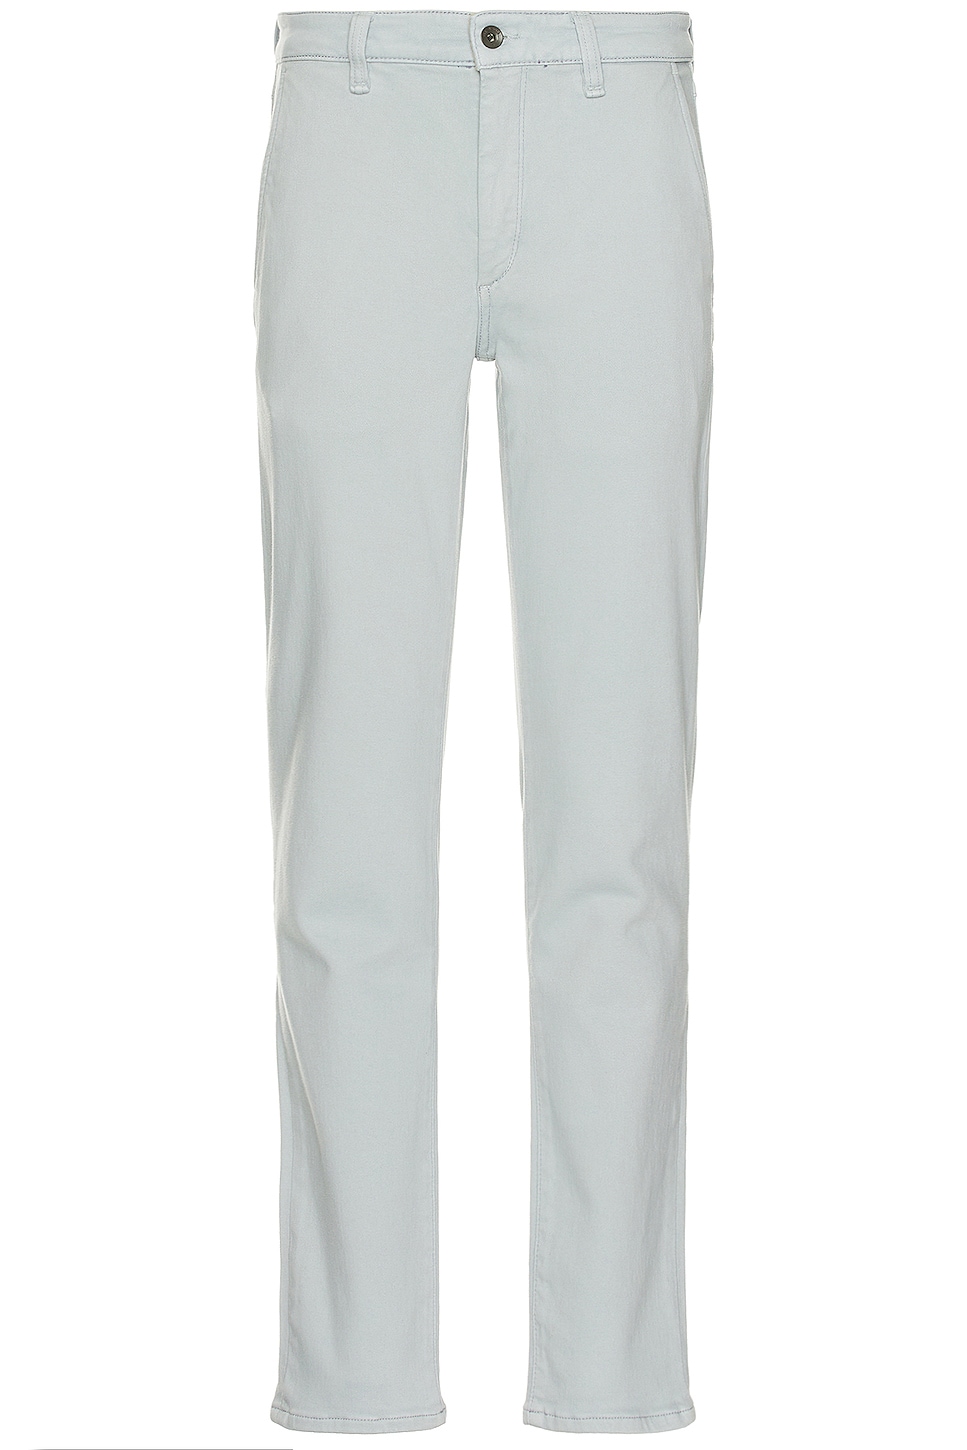 Image 1 of Rag & Bone Fit 2 Action Loopback Chino Pant in Desert Blue